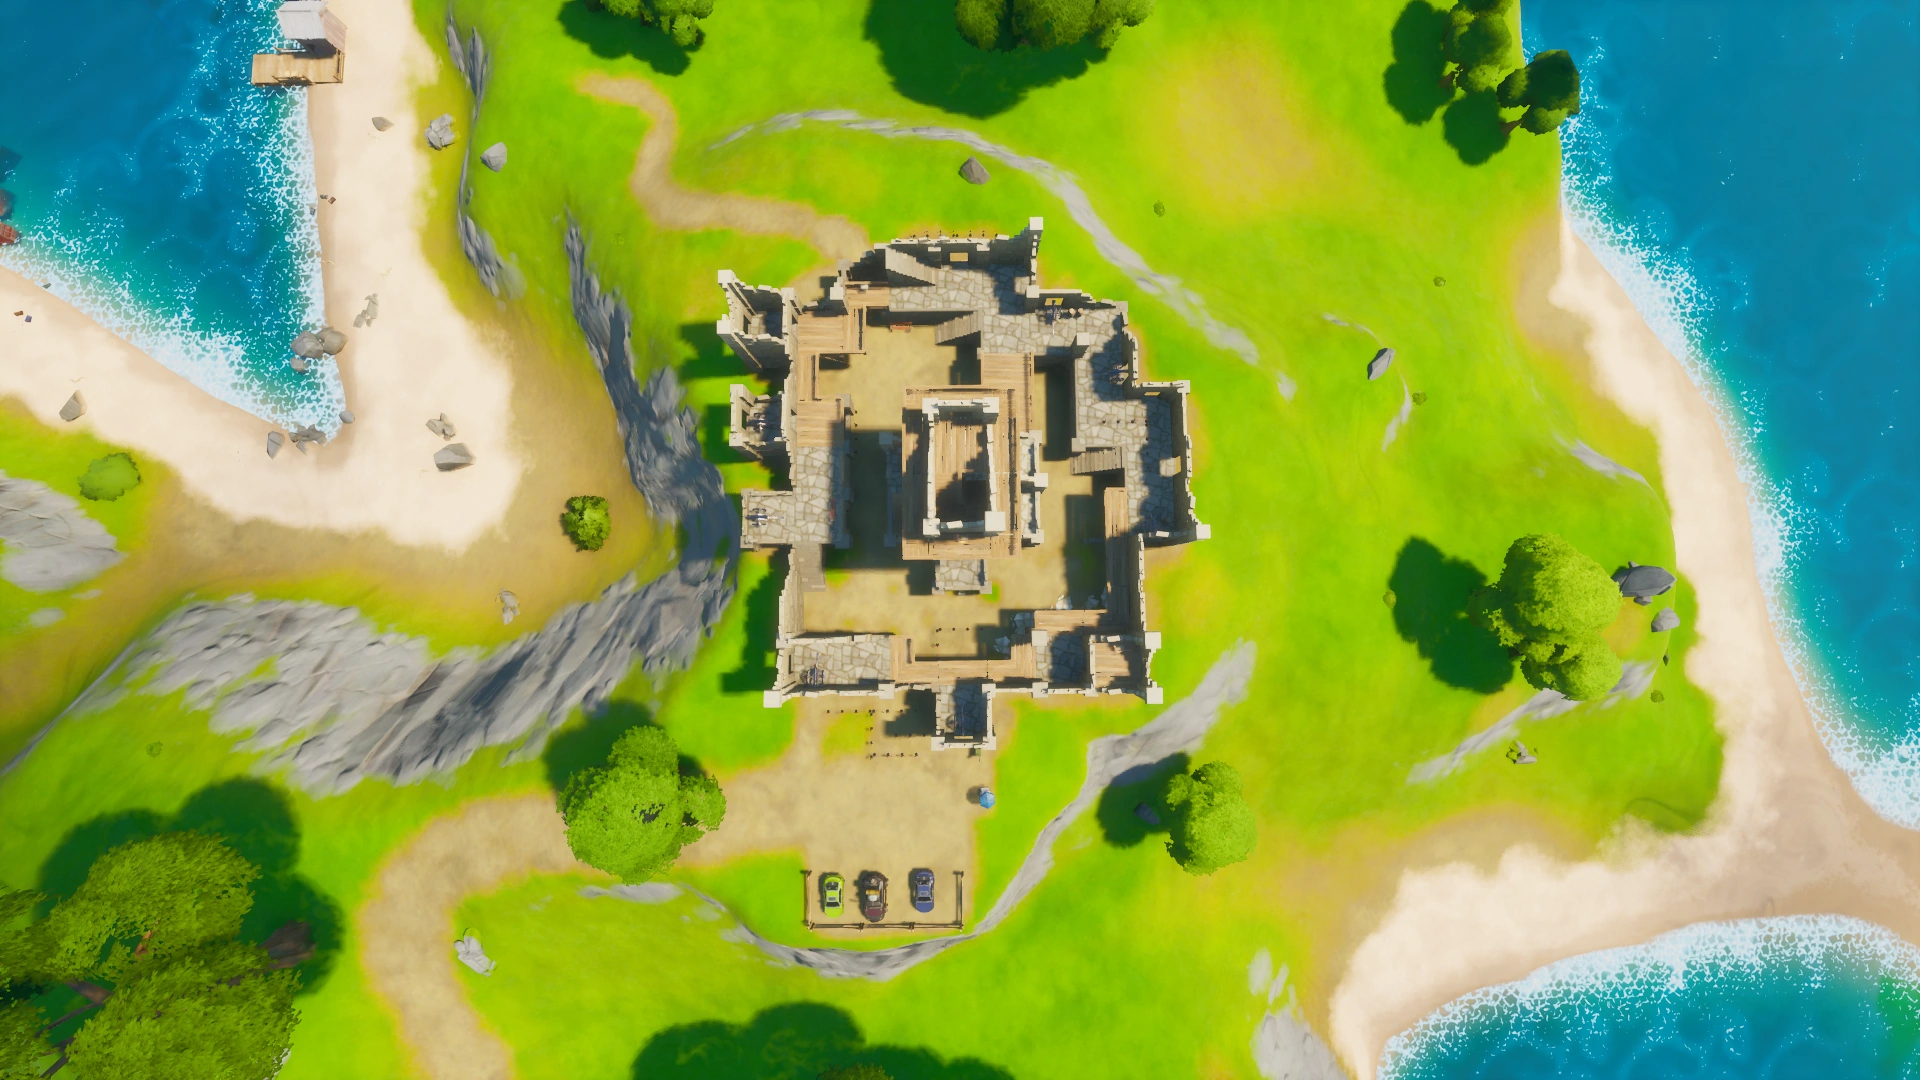 Fort Crumpet as seen from above